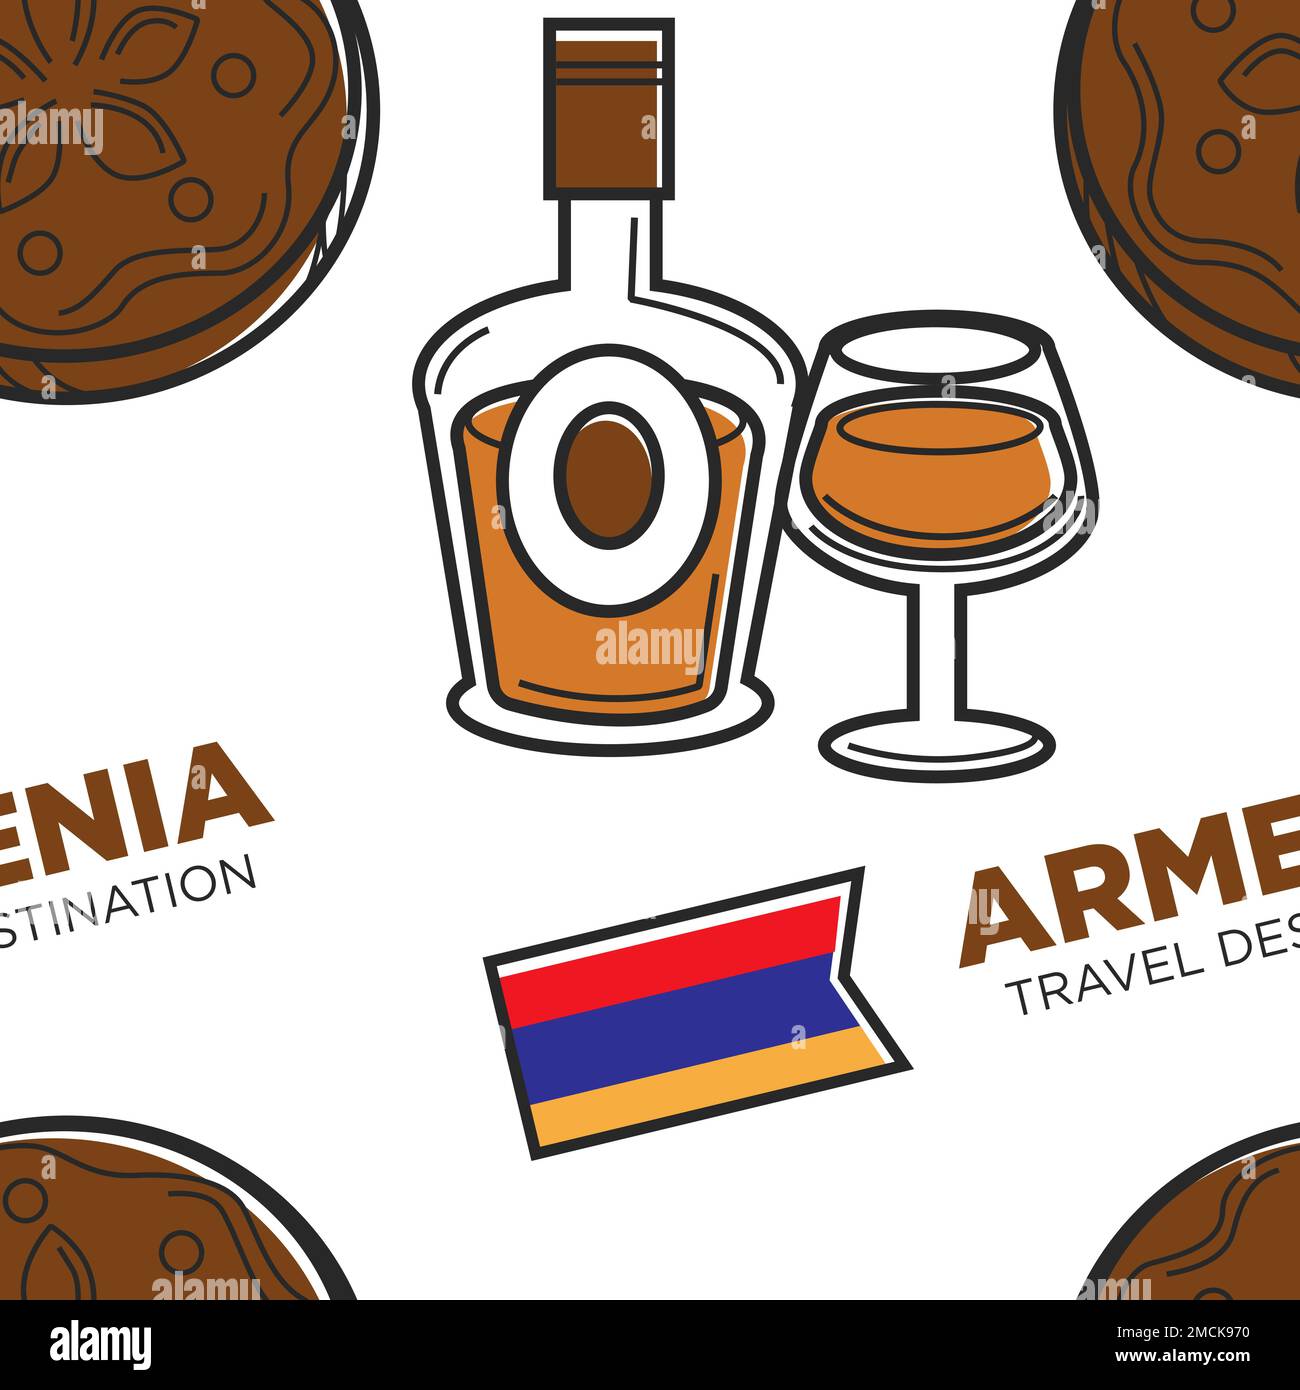 Alcohol drink Armenia travel destination traditional beverage seamless pattern vector cognac or Armenian vodka Artsakh and pastry or bun national flag Stock Vector